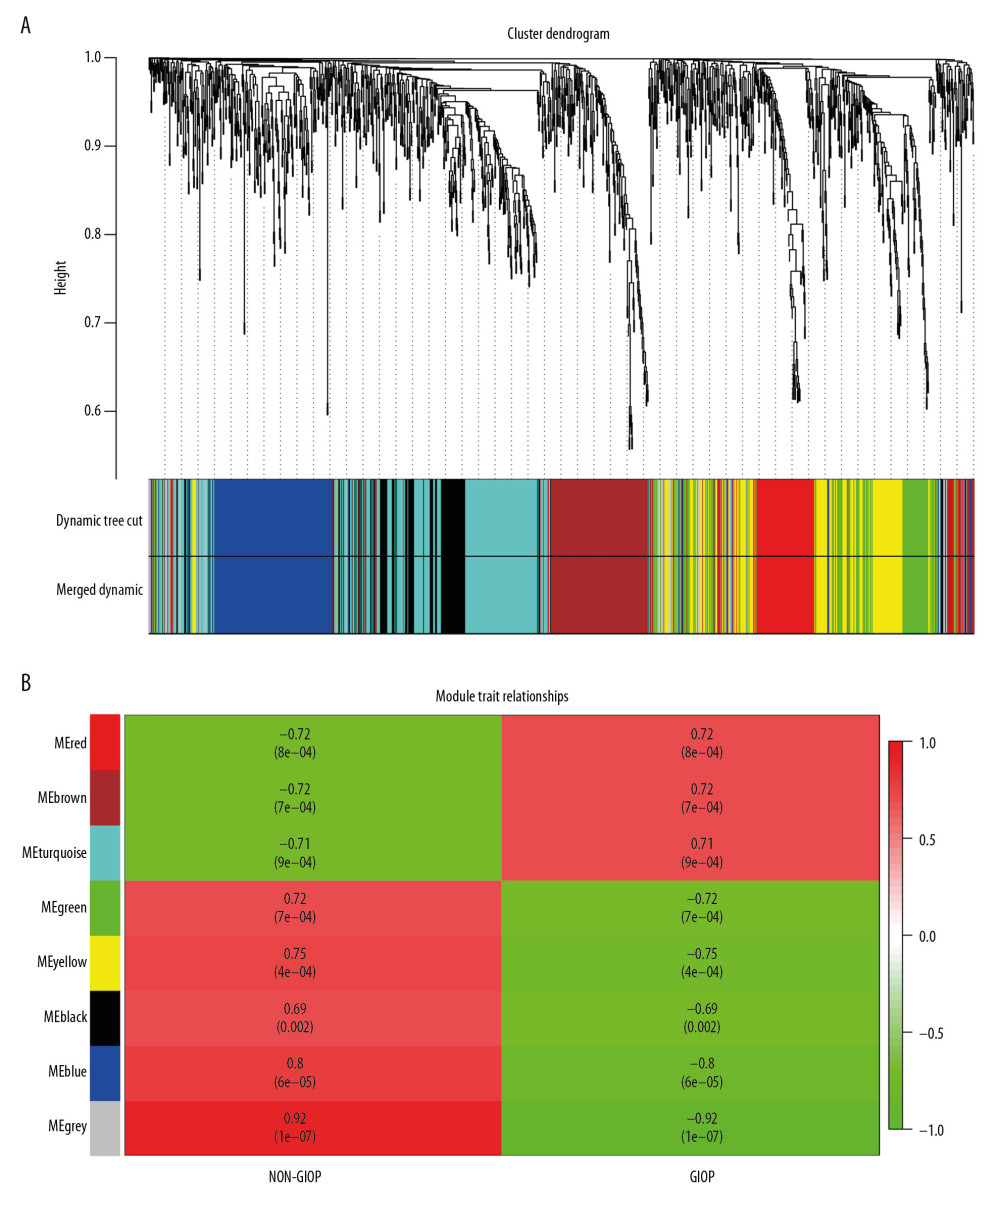 Hub module selection. (A) Dendrogram of all DEGs clustered according to a dissimilarity measure (1-TOM). (B) Heatmap of the relationships of module with the disease traits. In the module, the greater mean gene relevance stands for the greater relationship of this module with the traits of interest. The horizontal and vertical axes stand for clinical factors and modules, respectively. The color gradient from red to green represents the shift from positive to negative correlation. The numbers in grids represent correlation coefficients. Values in parenthesis are the P-values for the association test. The red, brown, and turquoise gene modules are positively related to GIOP status, values in the figure indicate the correlation coefficient between modules and clinical traits. TOM – topological overlap matrix; DEGs – differentially expressed genes; Me – module; GIOP – glucocorticoid-induced osteoporosis.